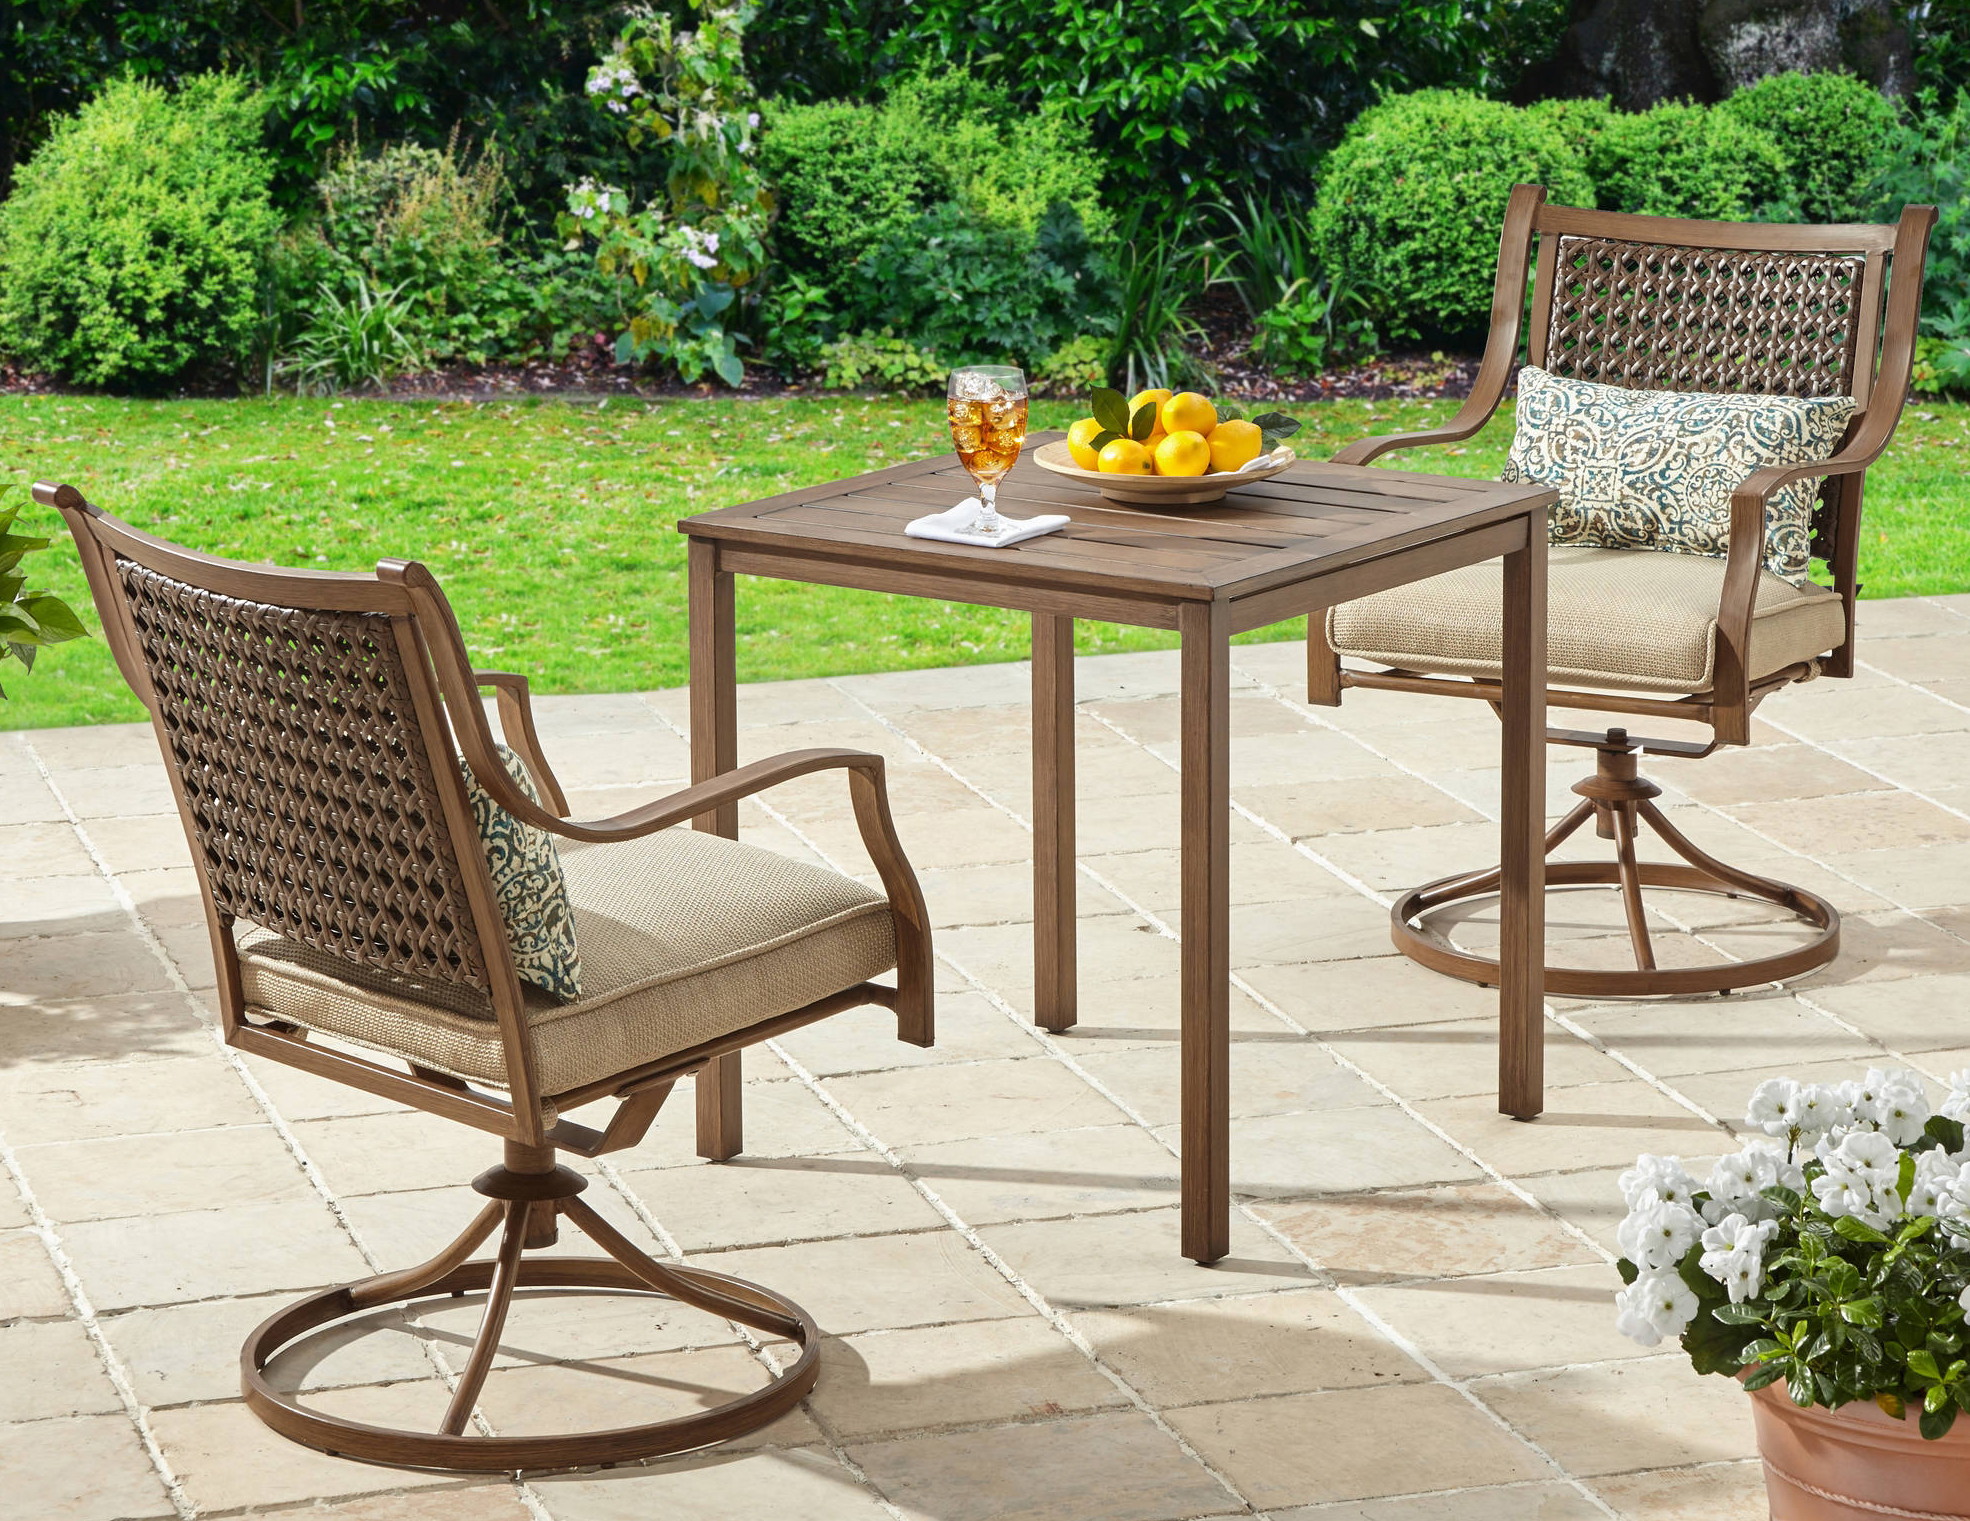 www.bagssaleusa.com/product-category/backpacks/ Outdoor Furniture Clearance - Patio Sets, as Low as $49! - The Krazy Coupon Lady